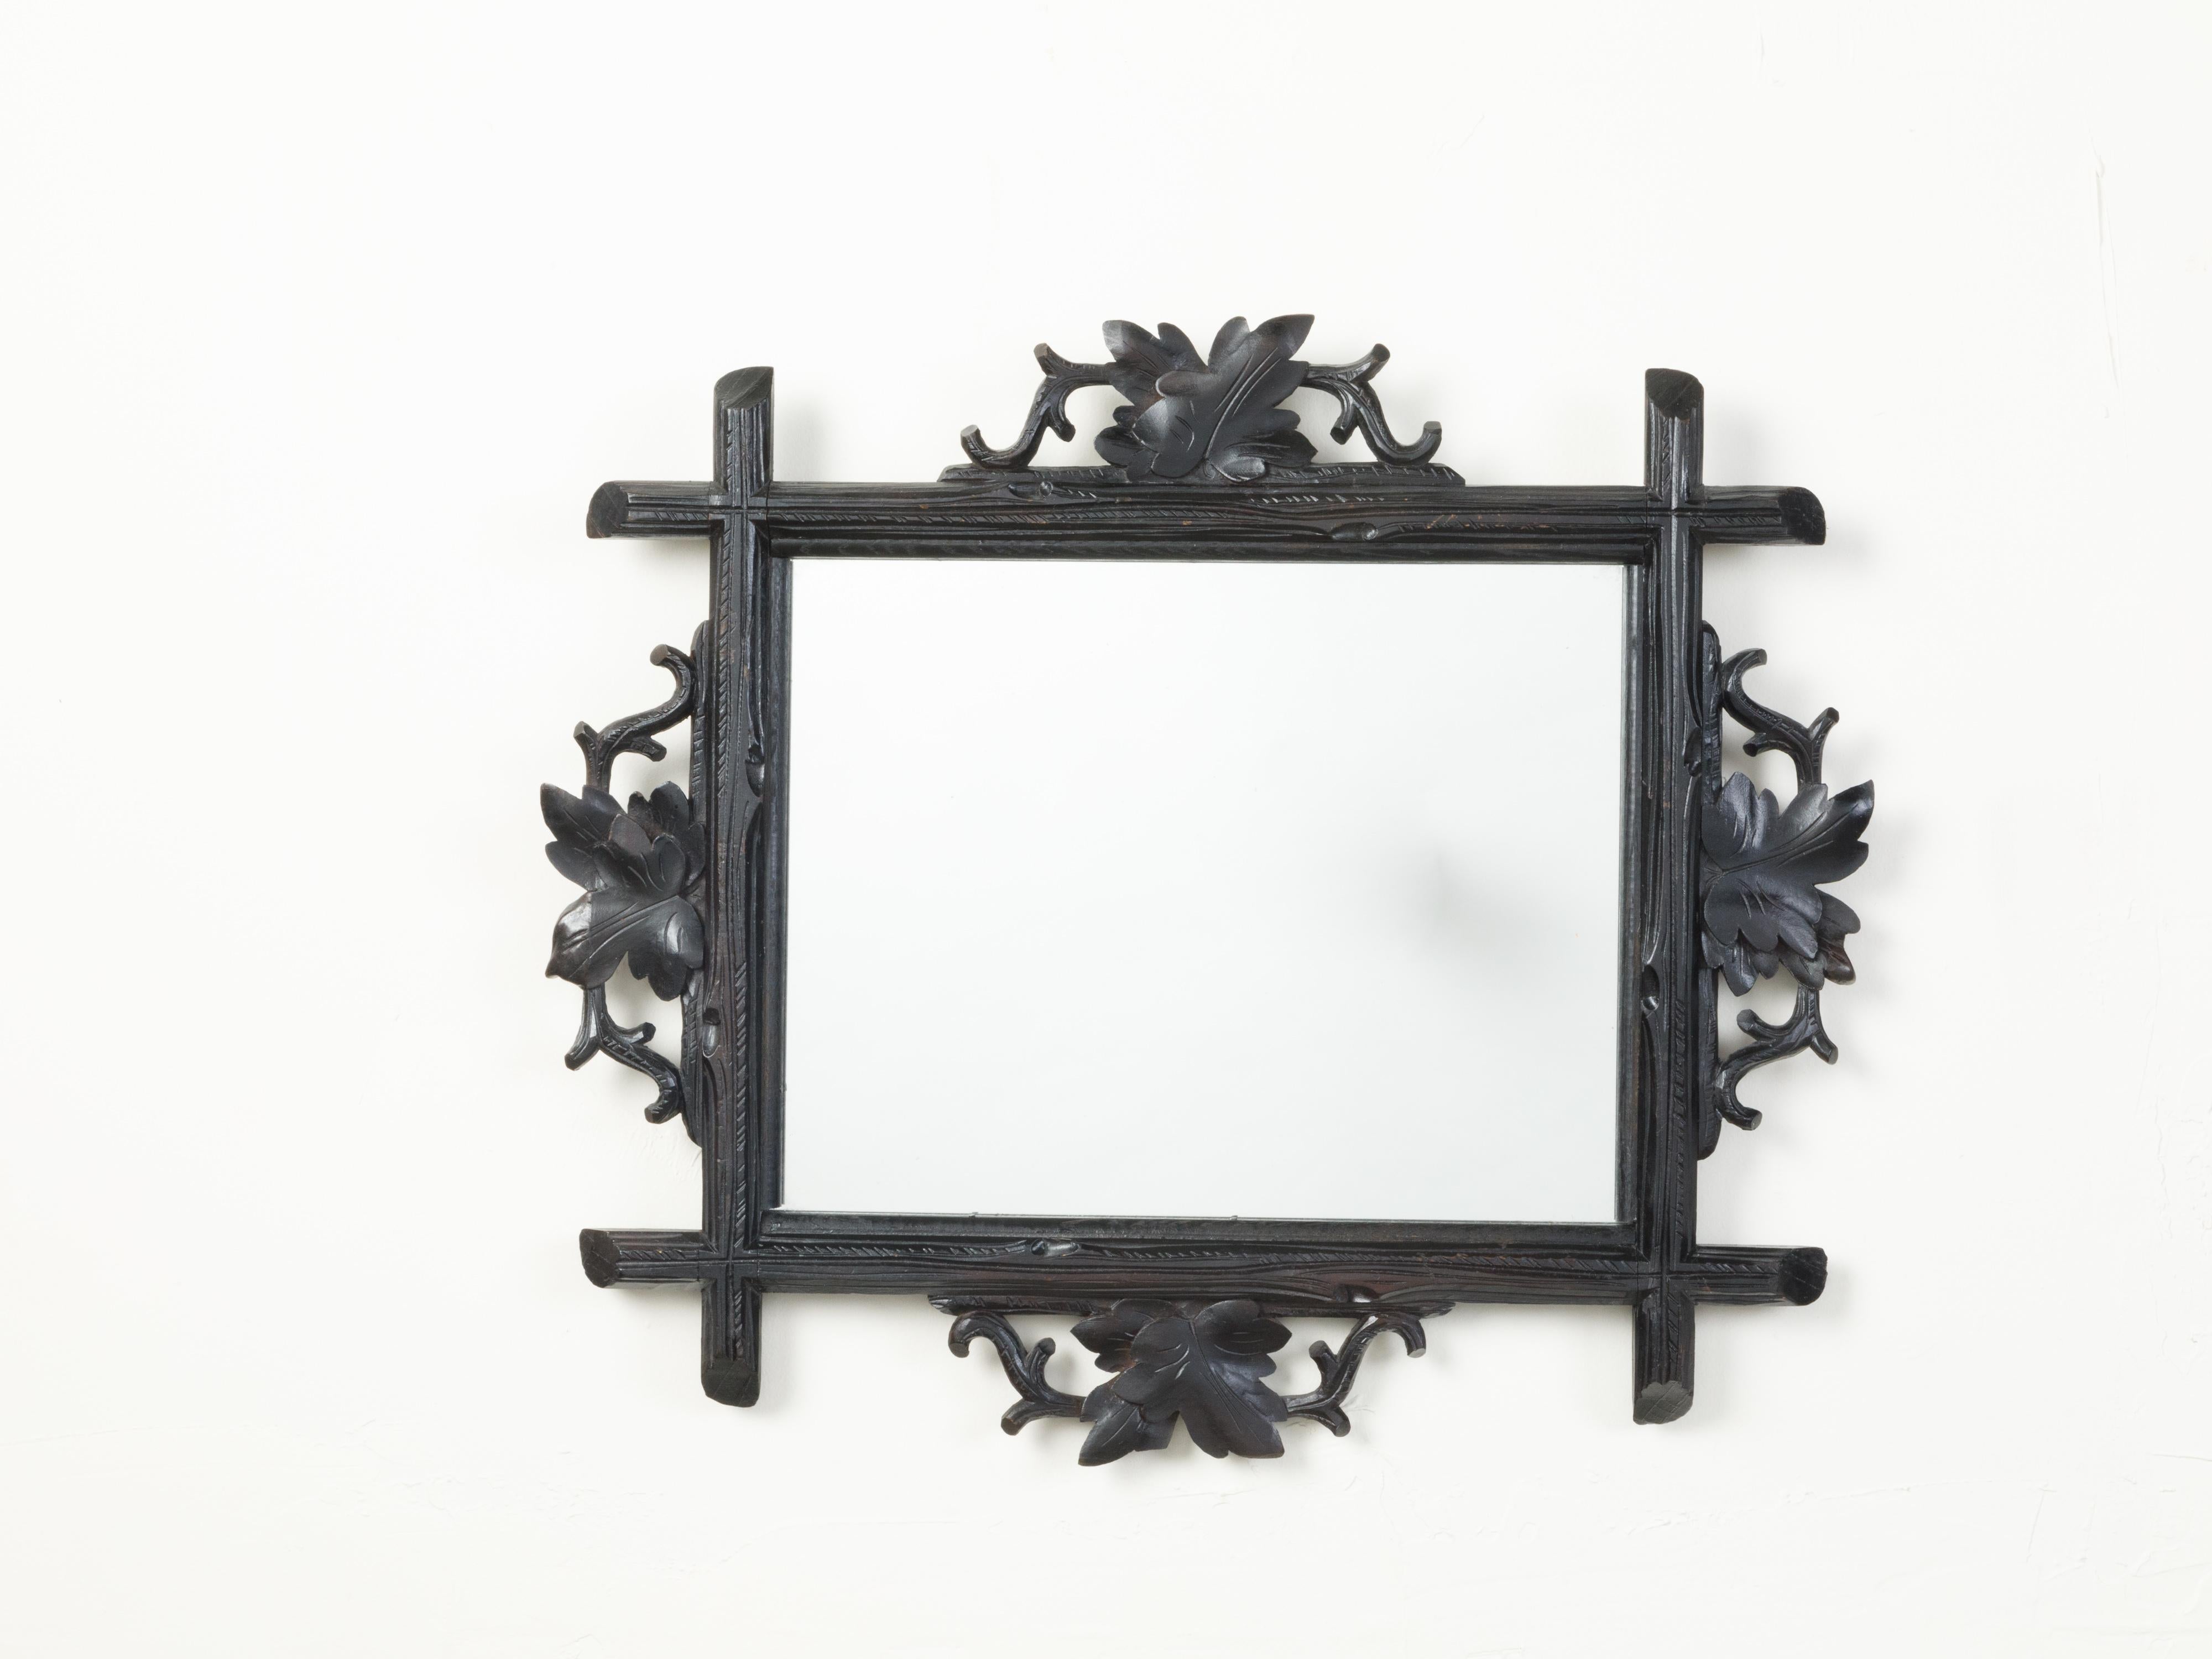 A French black forest mirror from the early 20th century, with hand-carved oak leaves. We currently have three mirrors available, priced and sold $1,350 EACH. Created at the Turn of the Century, this Black Forest mirror features a black frame made